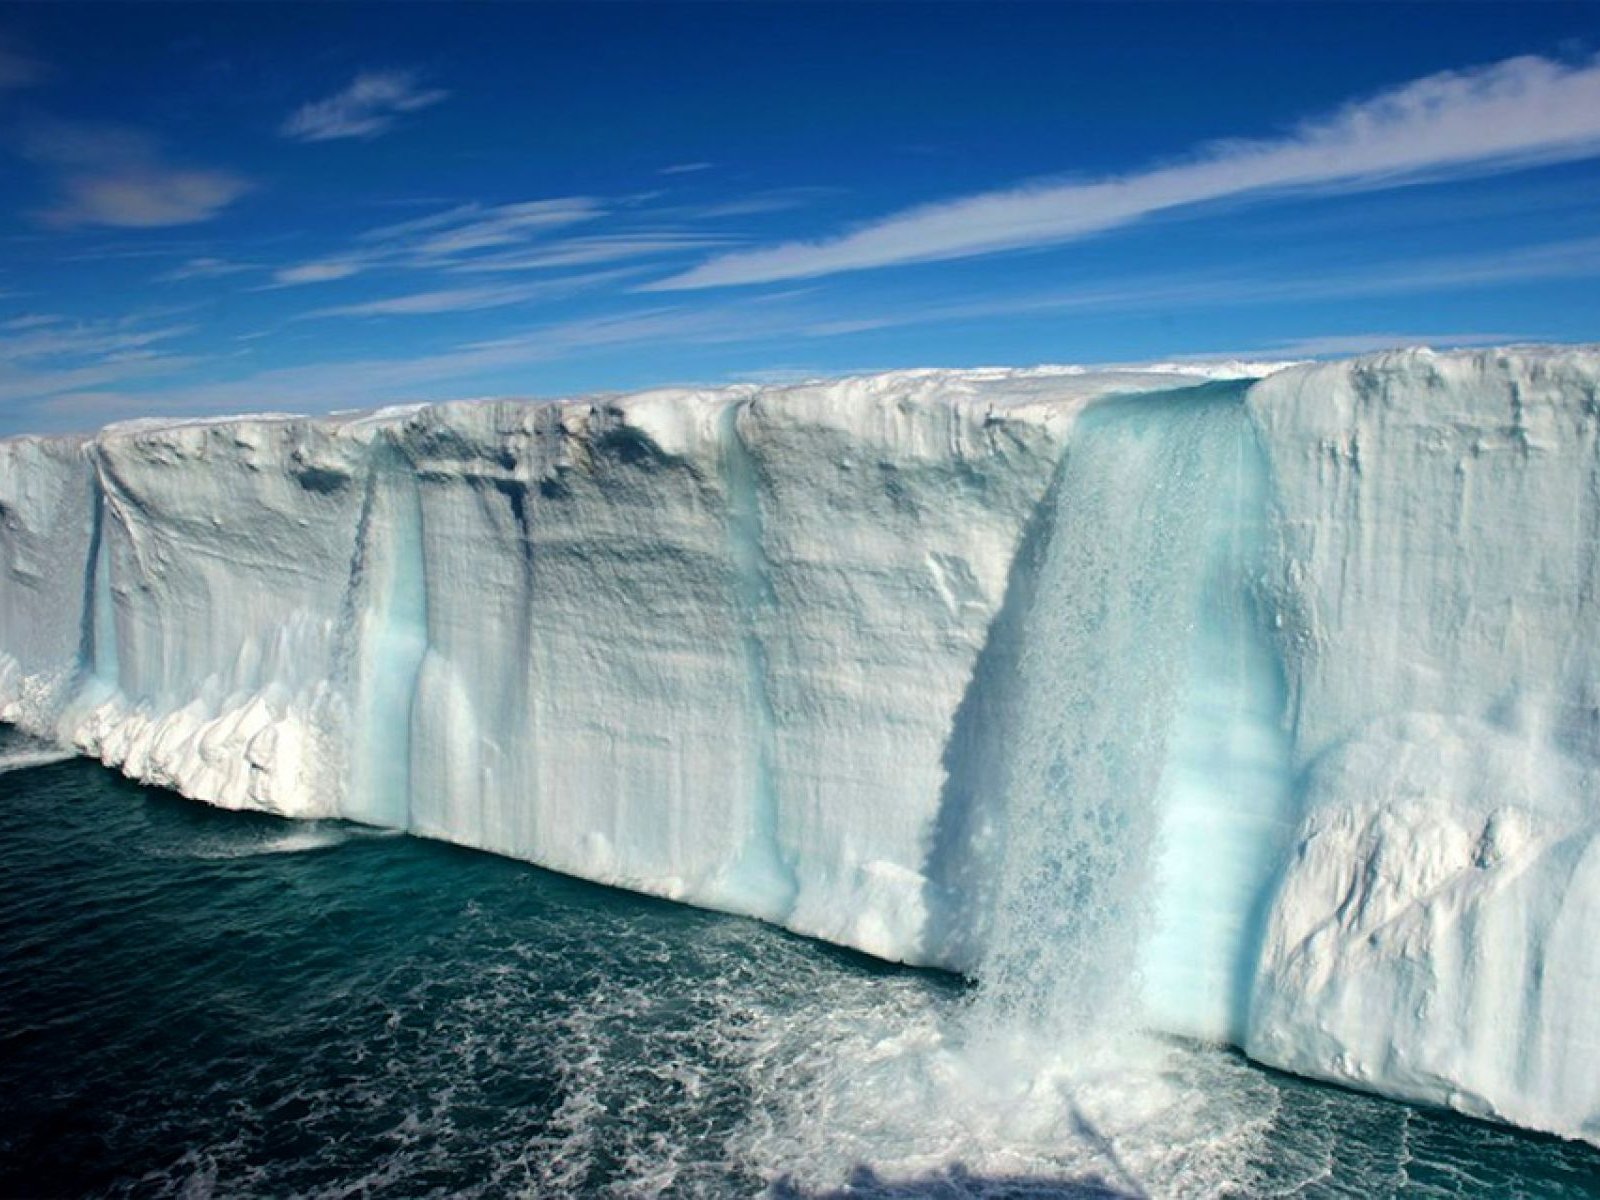 How to see glacial waterfalls in Svalbard